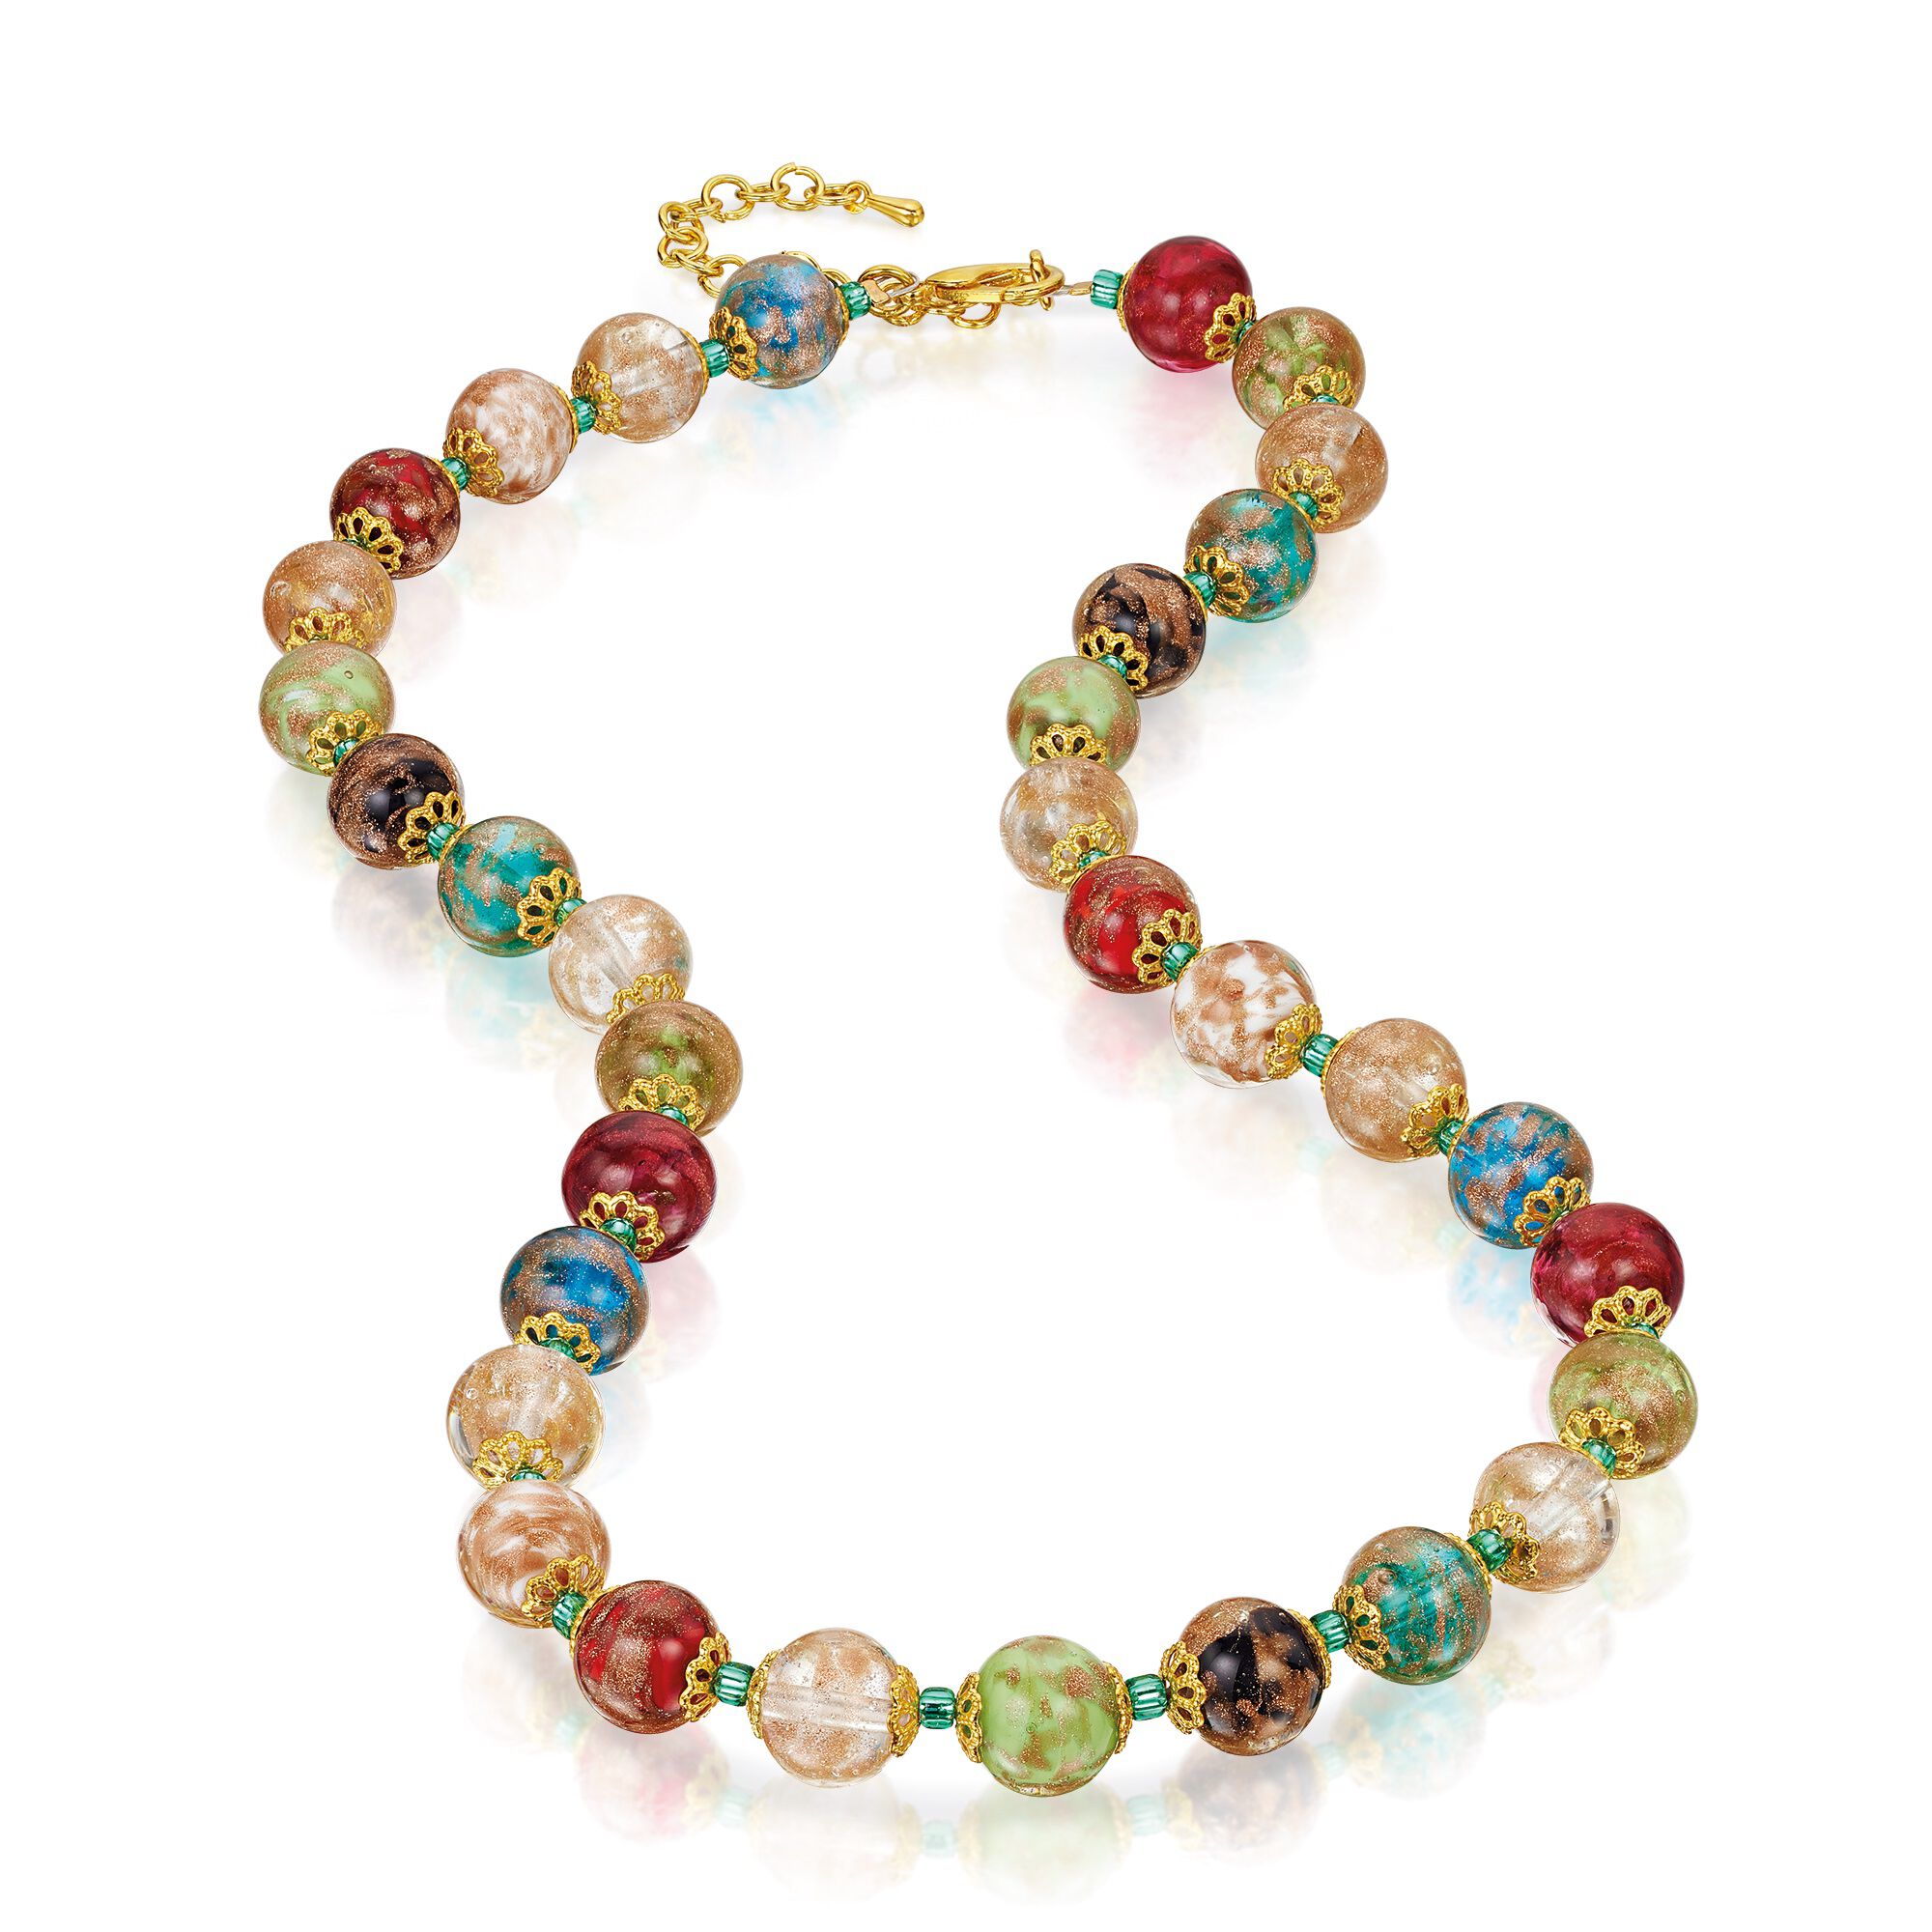 Share more than 75 murano glass necklace uk - POPPY